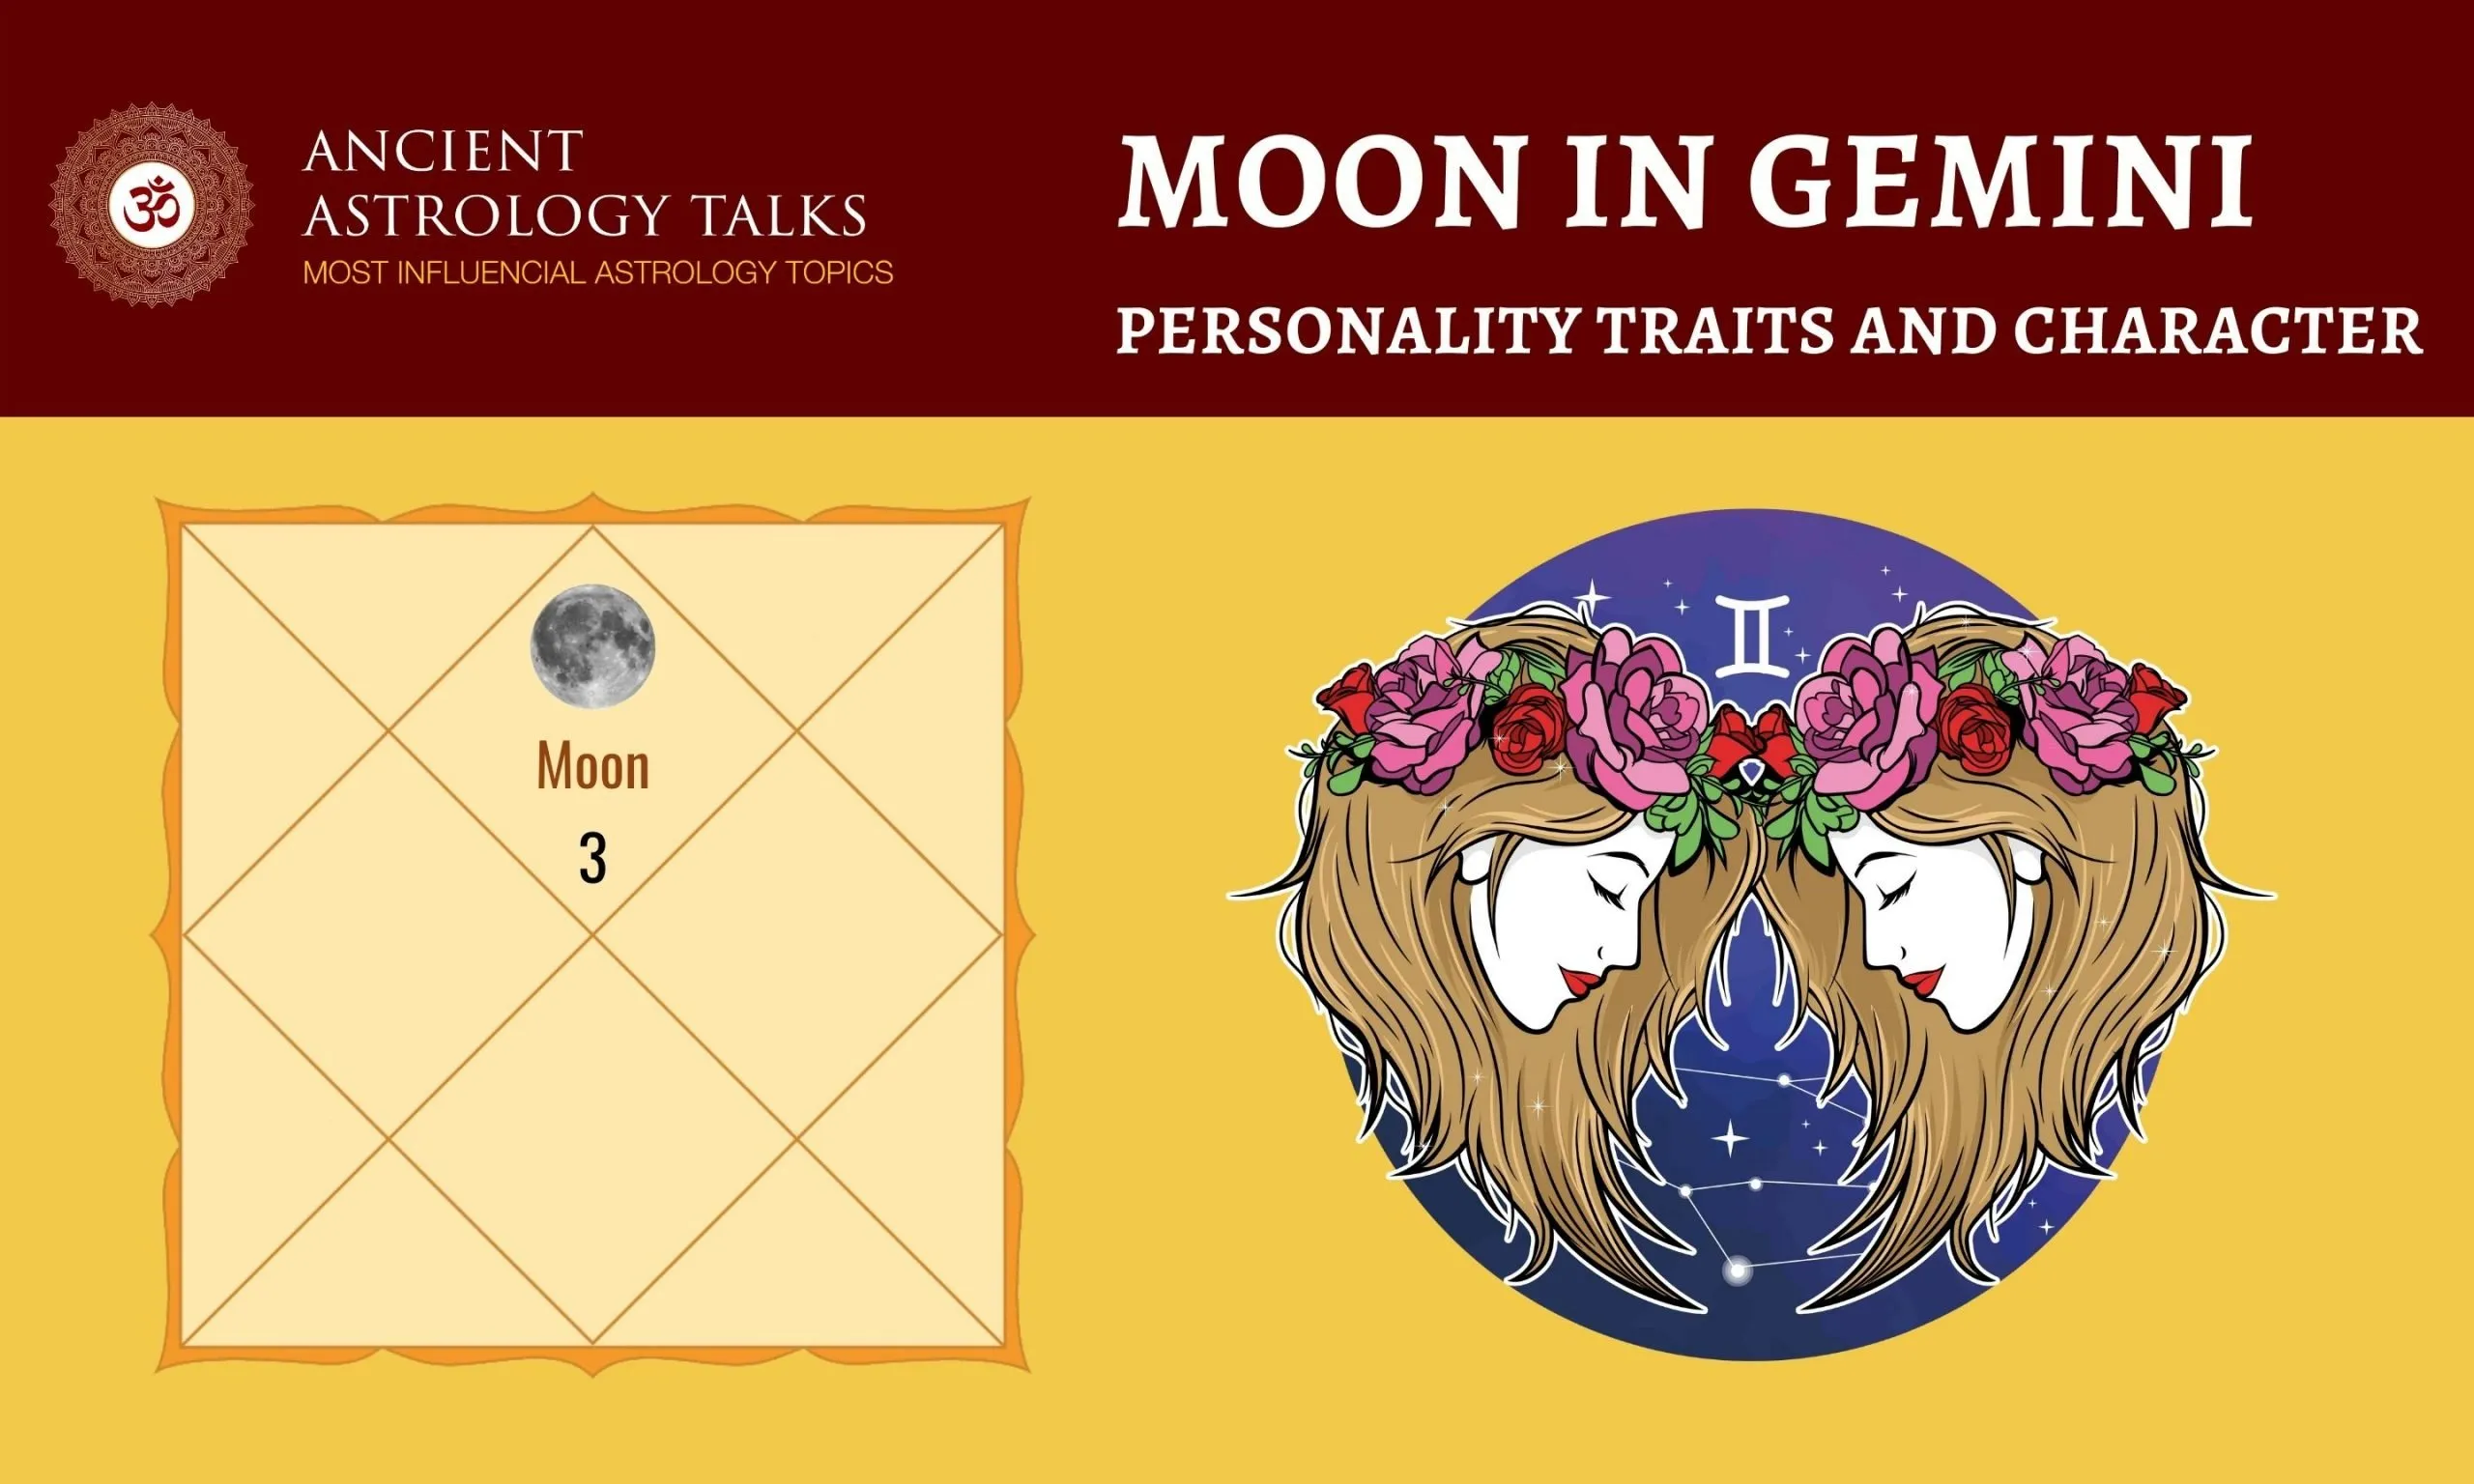 Moon in Gemini Personality Traits and Character